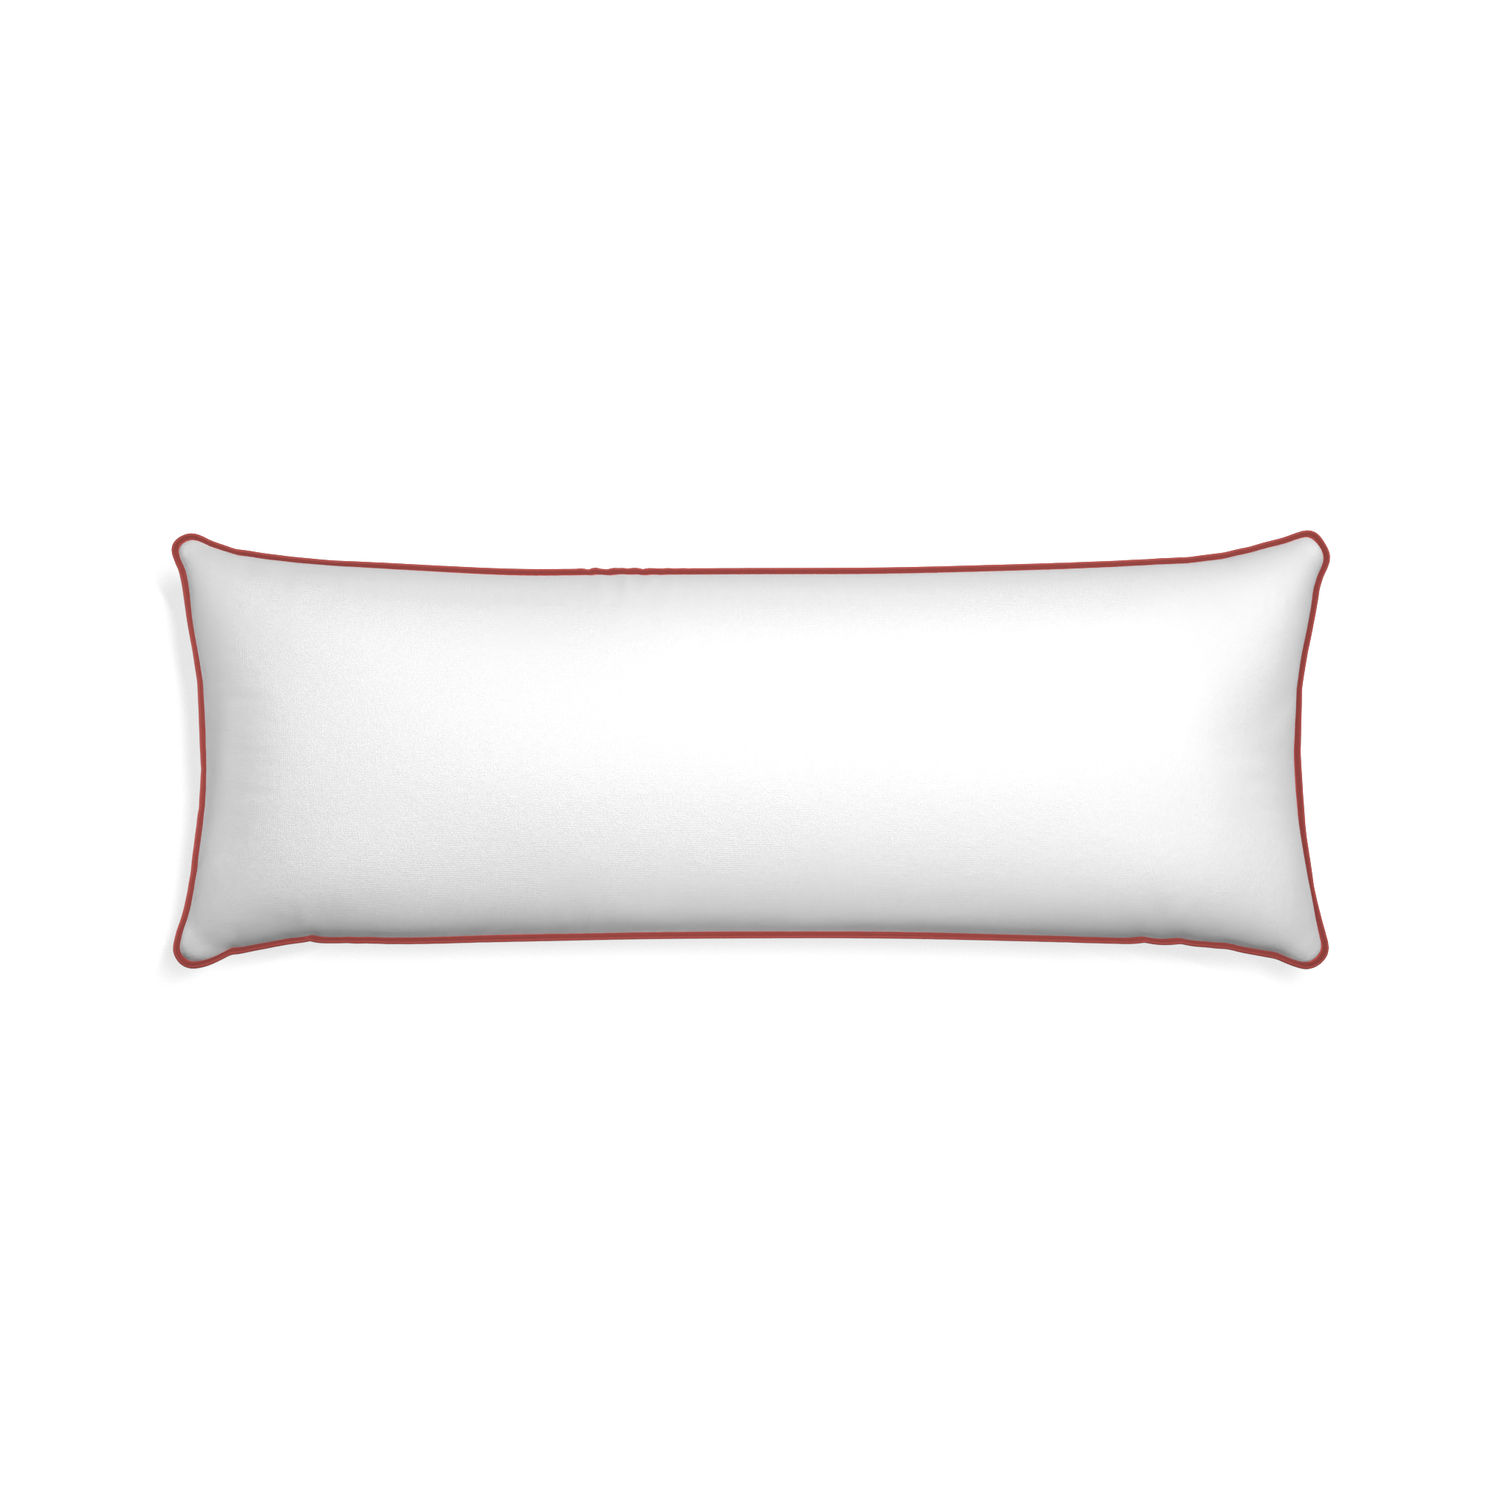 Xl-lumbar snow custom pillow with c piping on white background